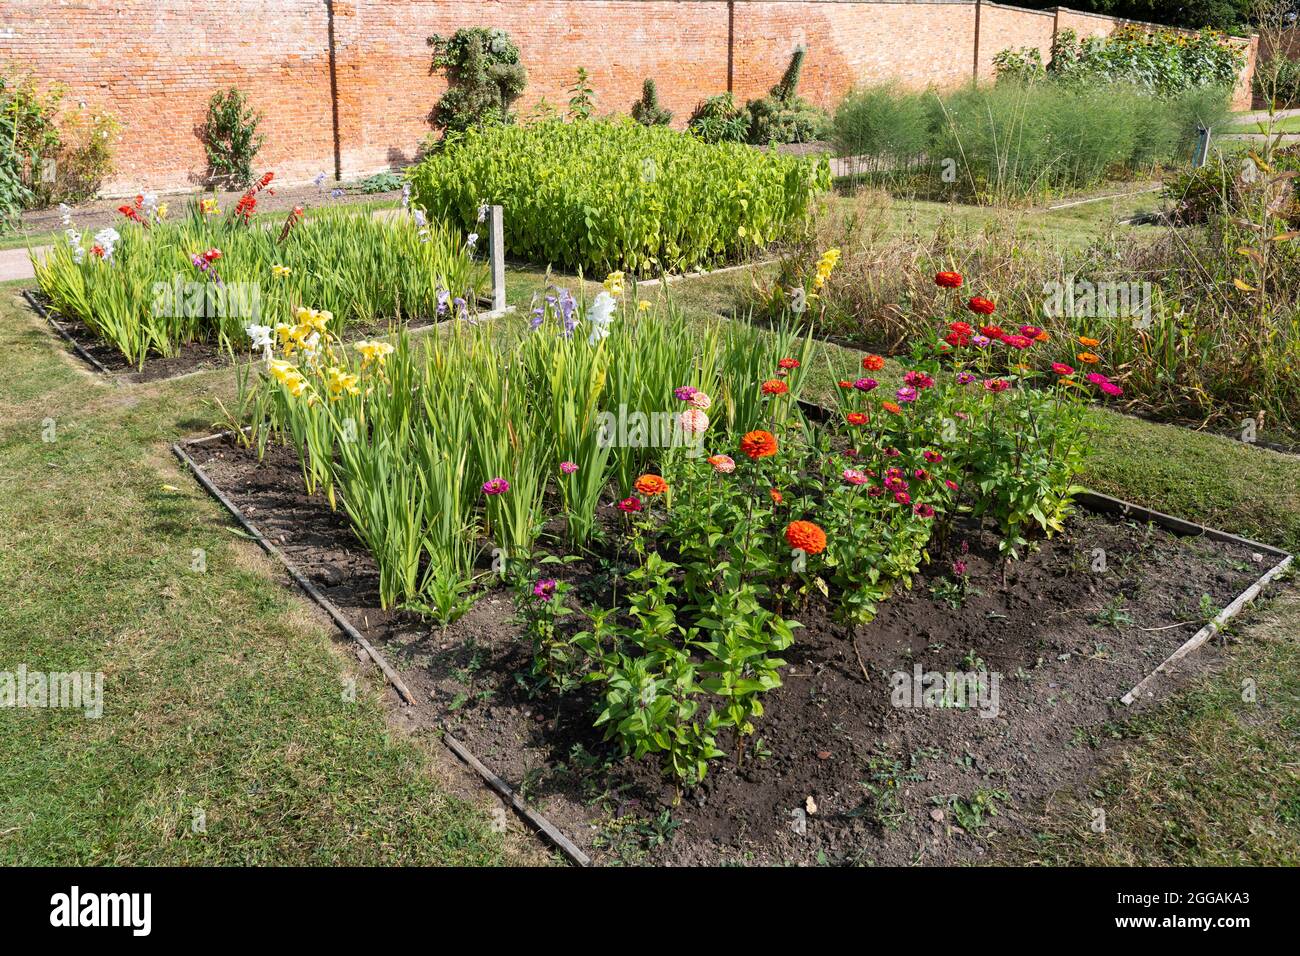 Flowerbeds with flowers blooming in the formal English garden at the Walled Gardens at Croome Court, Worcestershire, UK Stock Photo